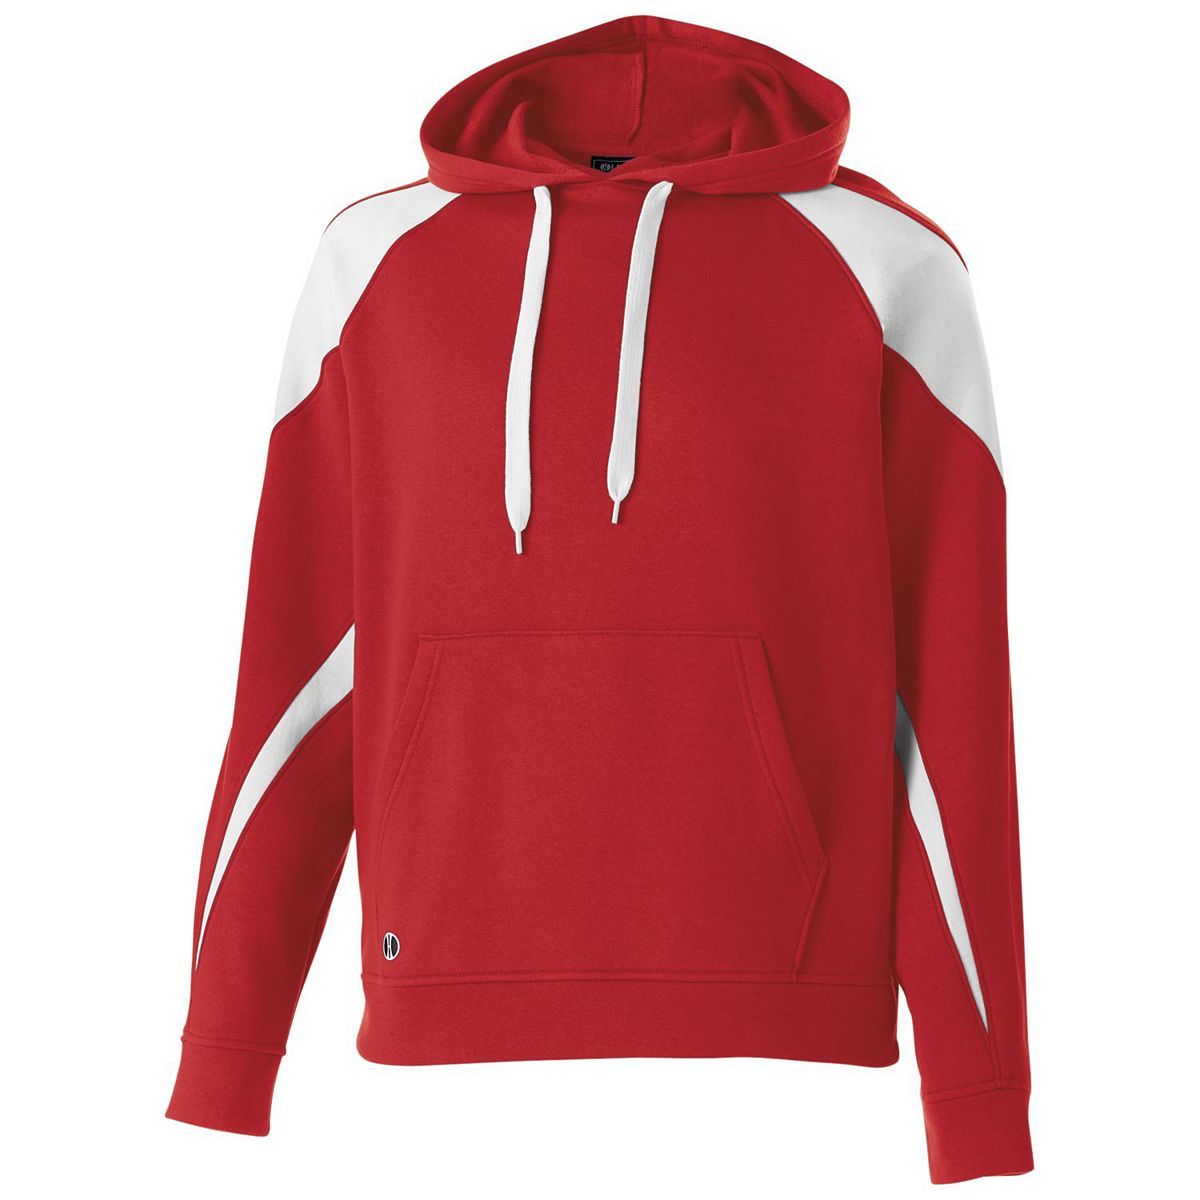 Holloway Youth Prospect Hoodie in Scarlet/White  -Part of the Youth, Youth-Hoodie, Hoodies, Holloway product lines at KanaleyCreations.com